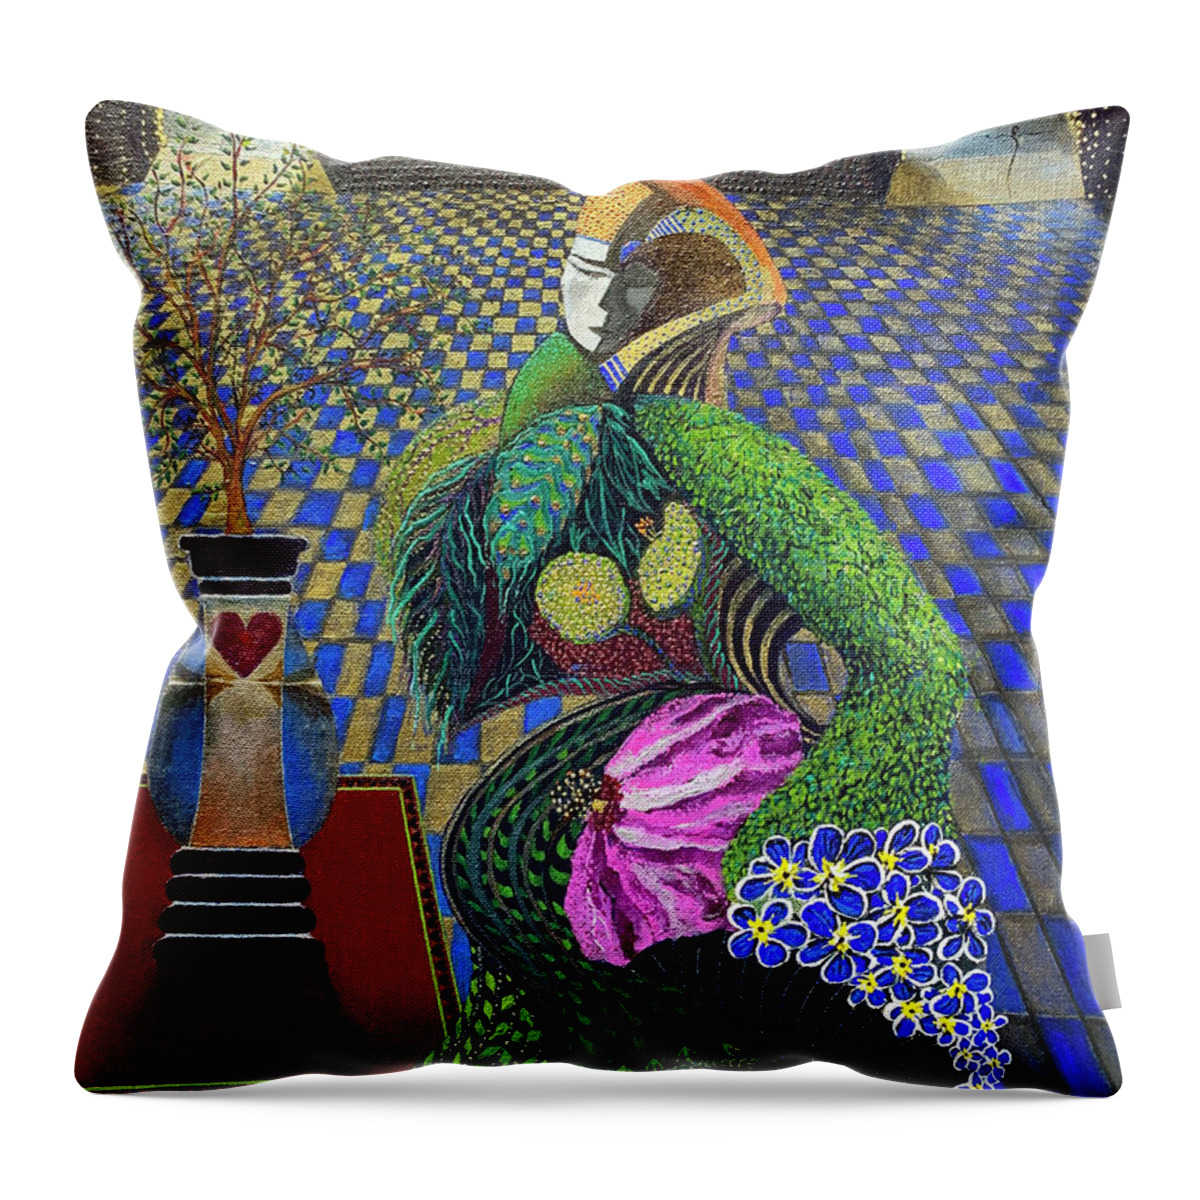  Throw Pillow featuring the painting Flower My Love Flower by James Lanigan Thompson MFA